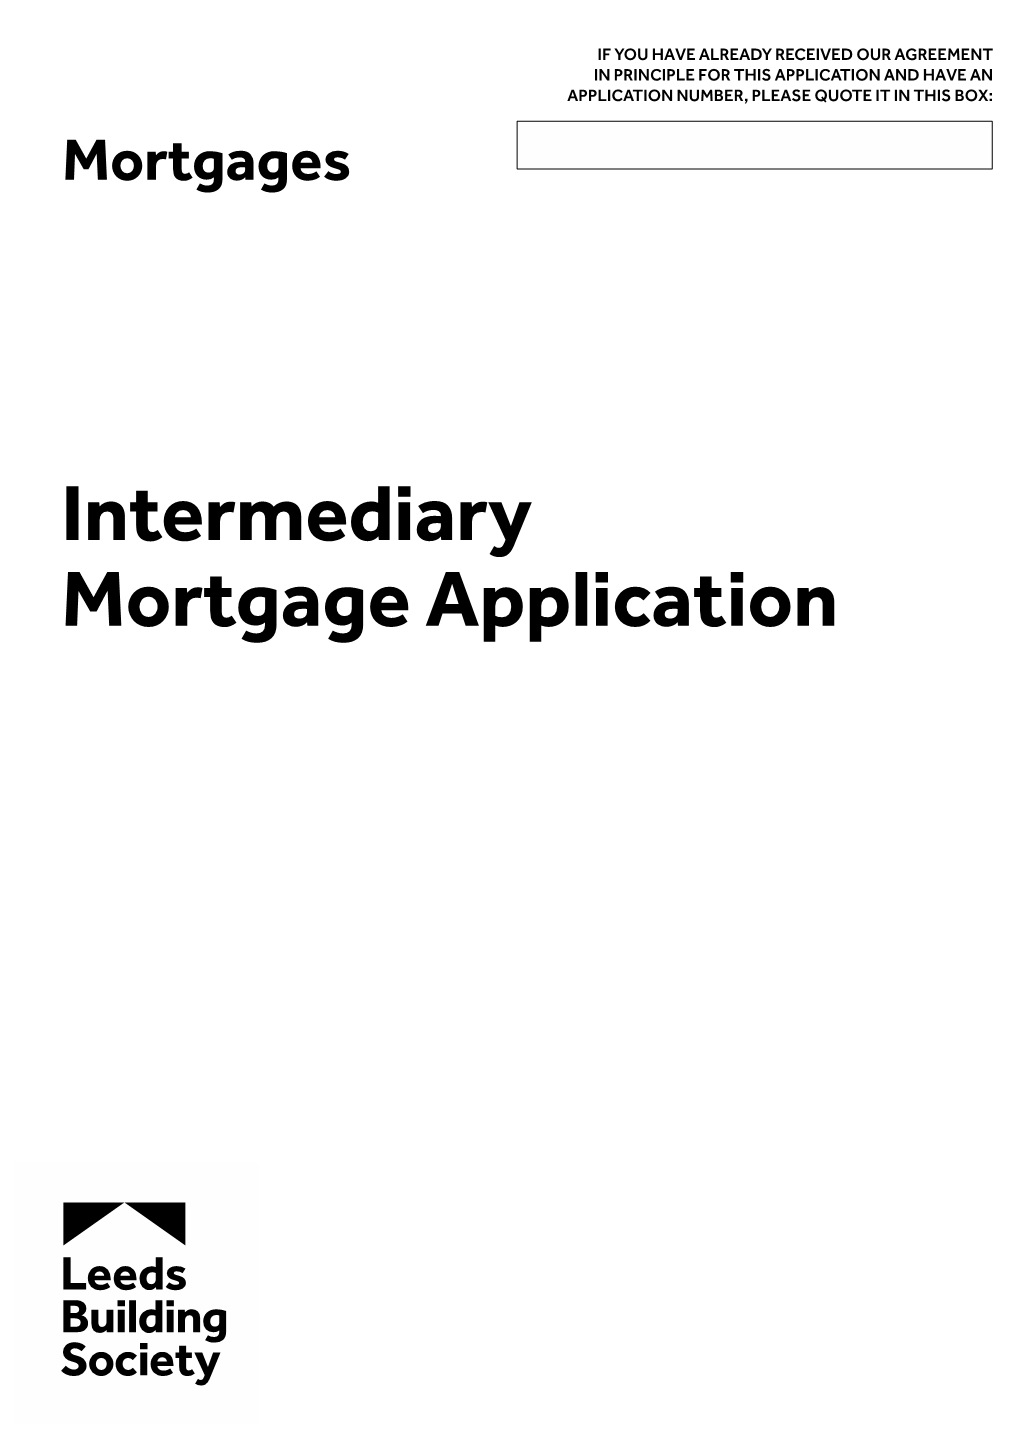 Intermediary Mortgage Application Submission Requirements